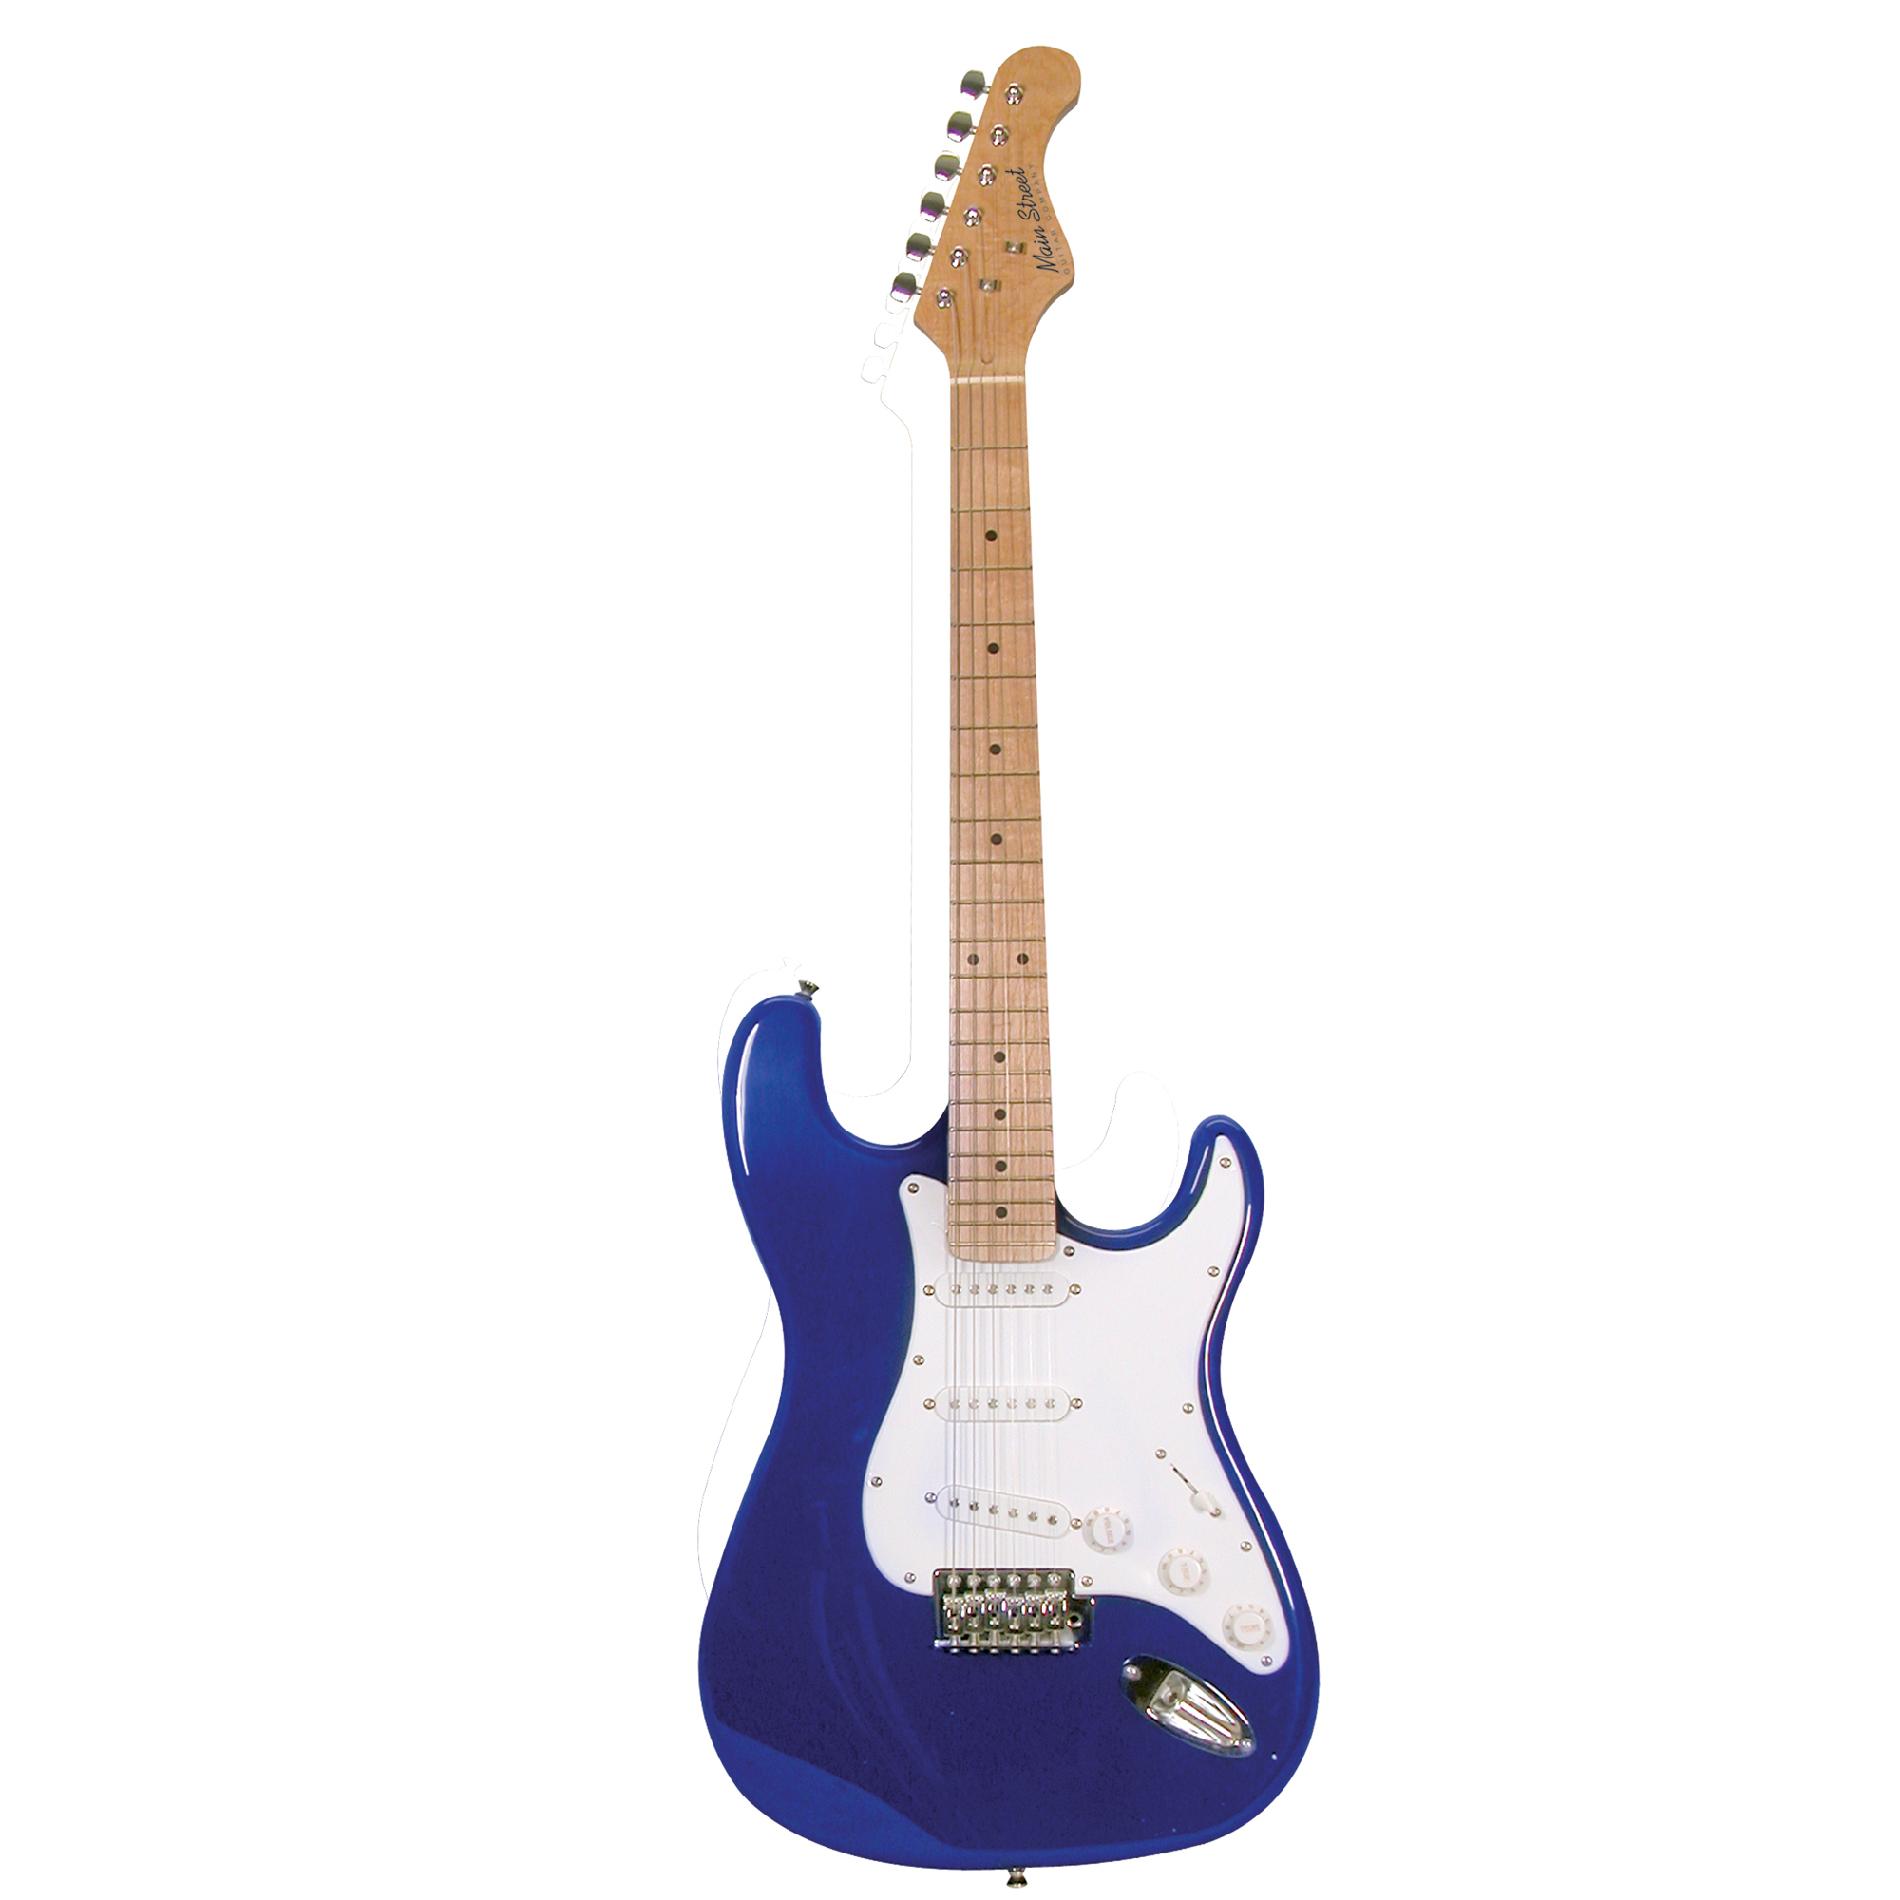 Main Street Double Cutaway Electric Guitar with Blue Laminated body